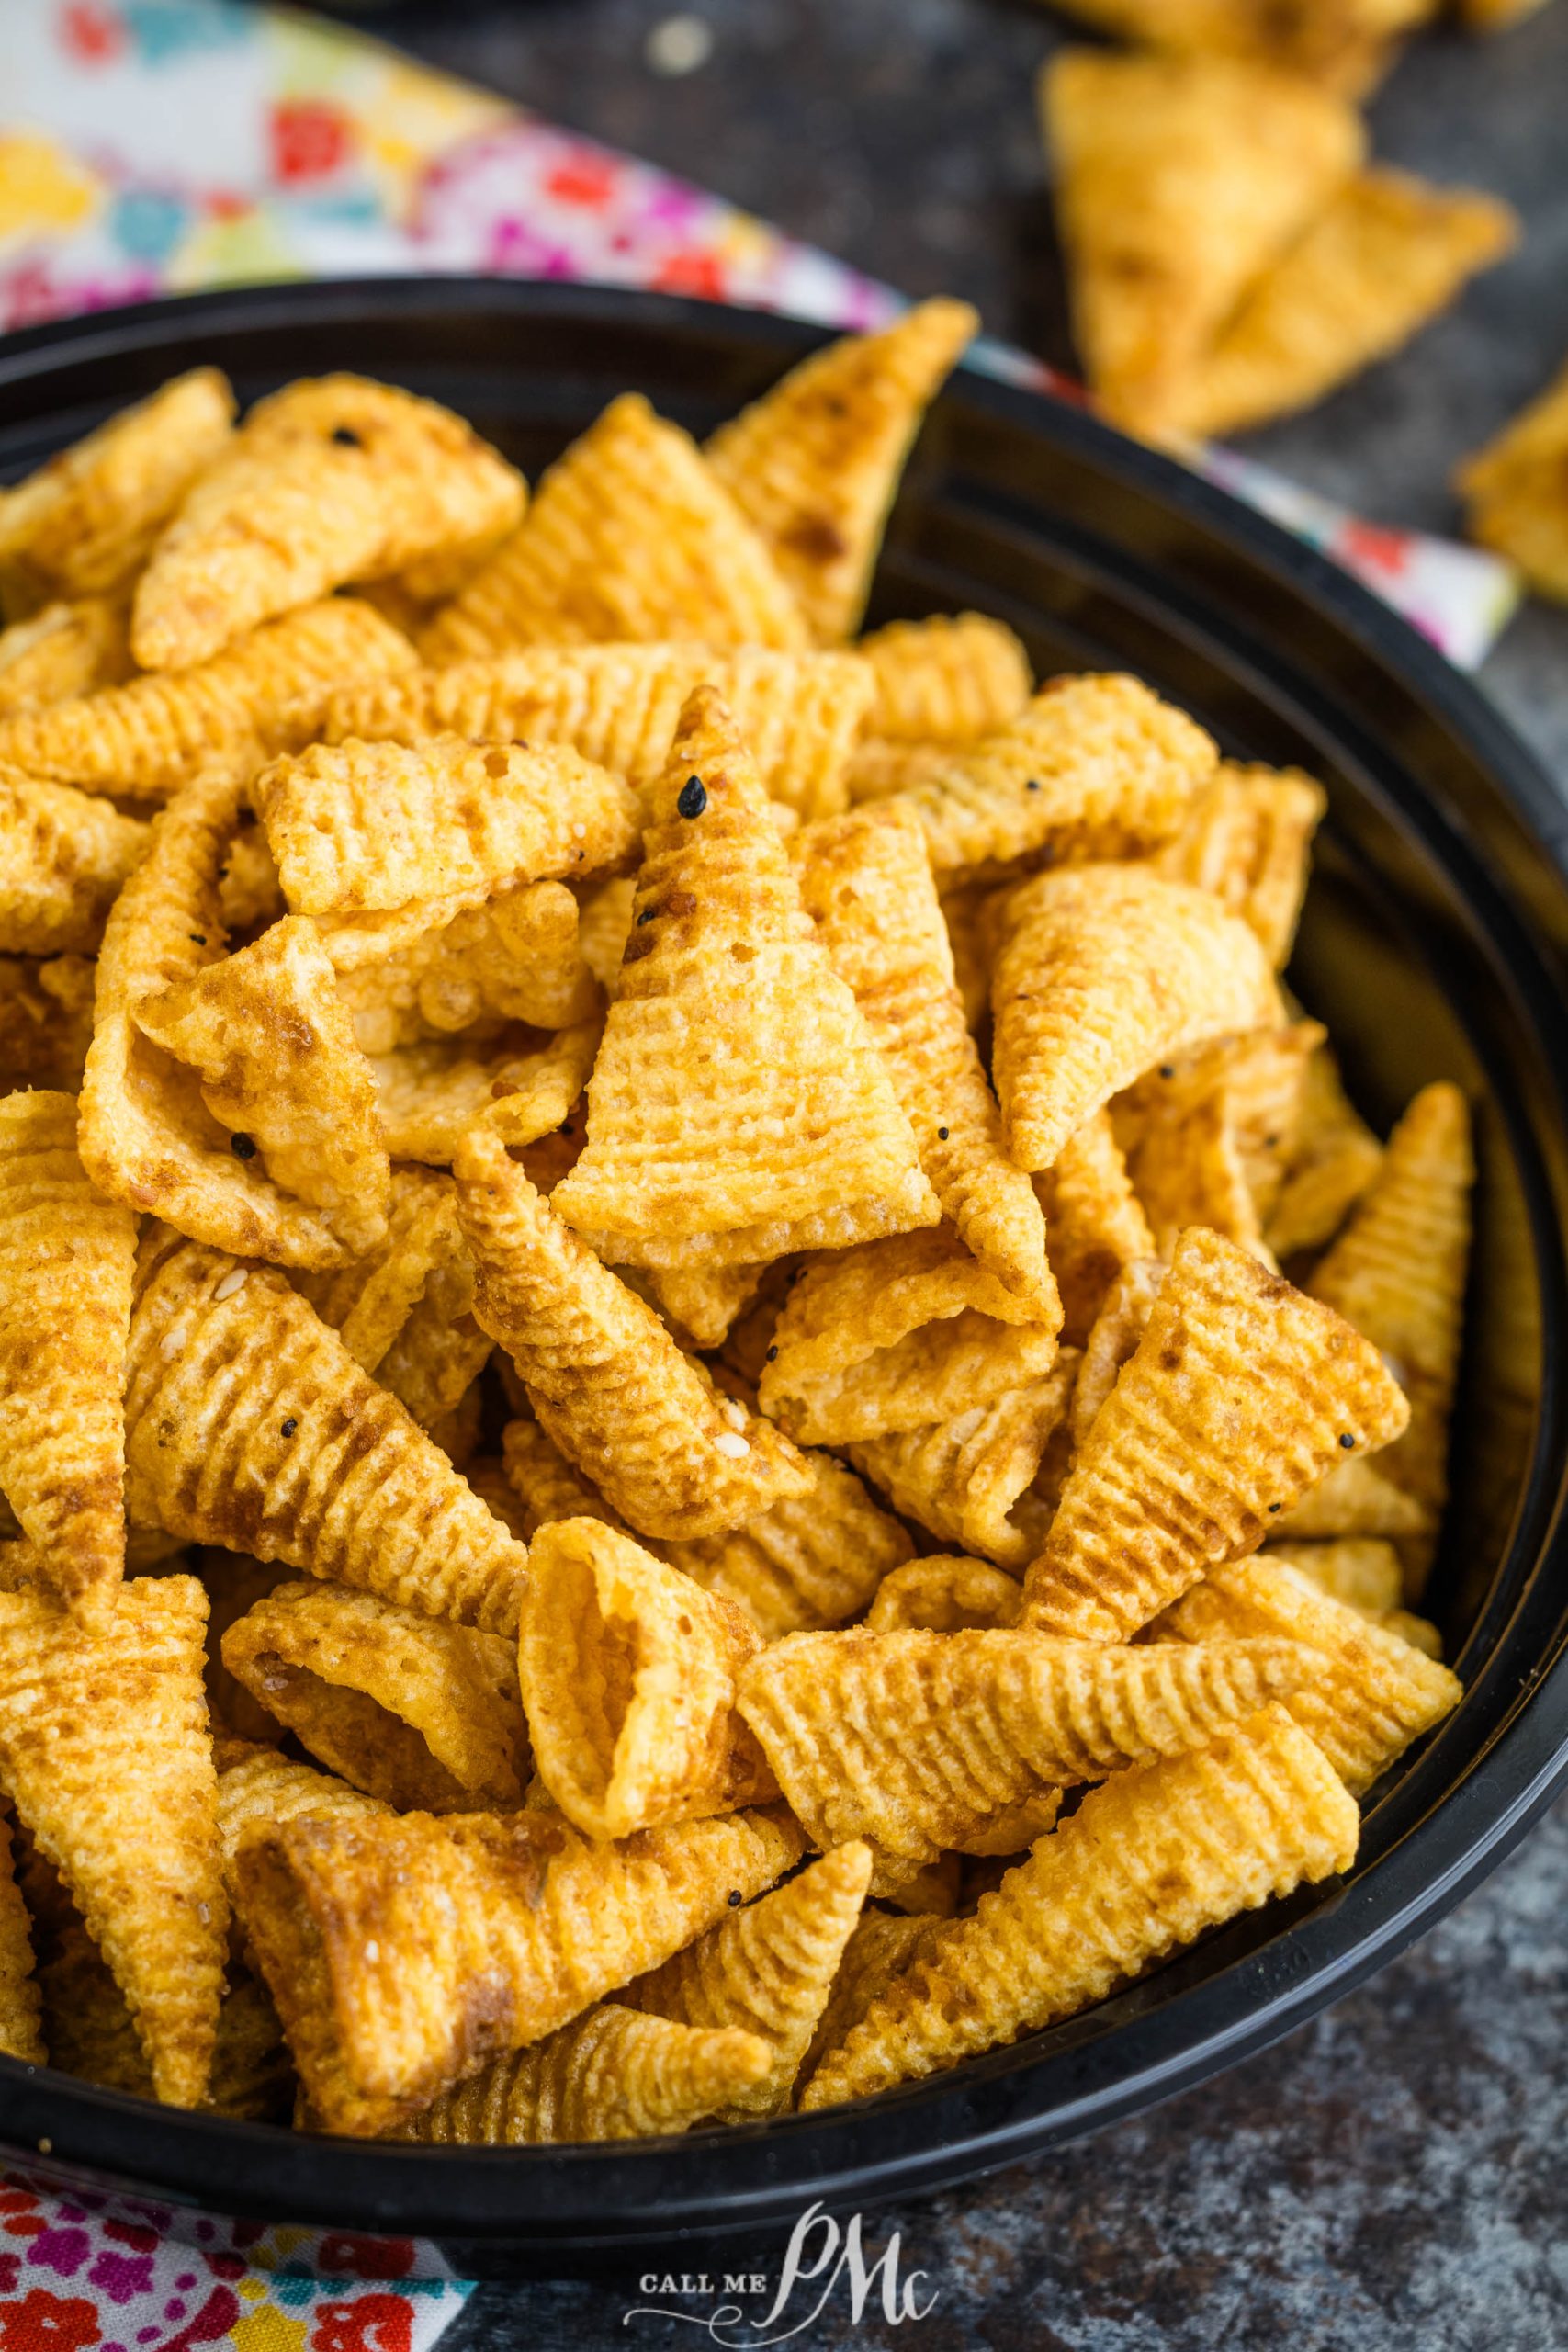 Bugles Chex Mix in a bowl on a table.